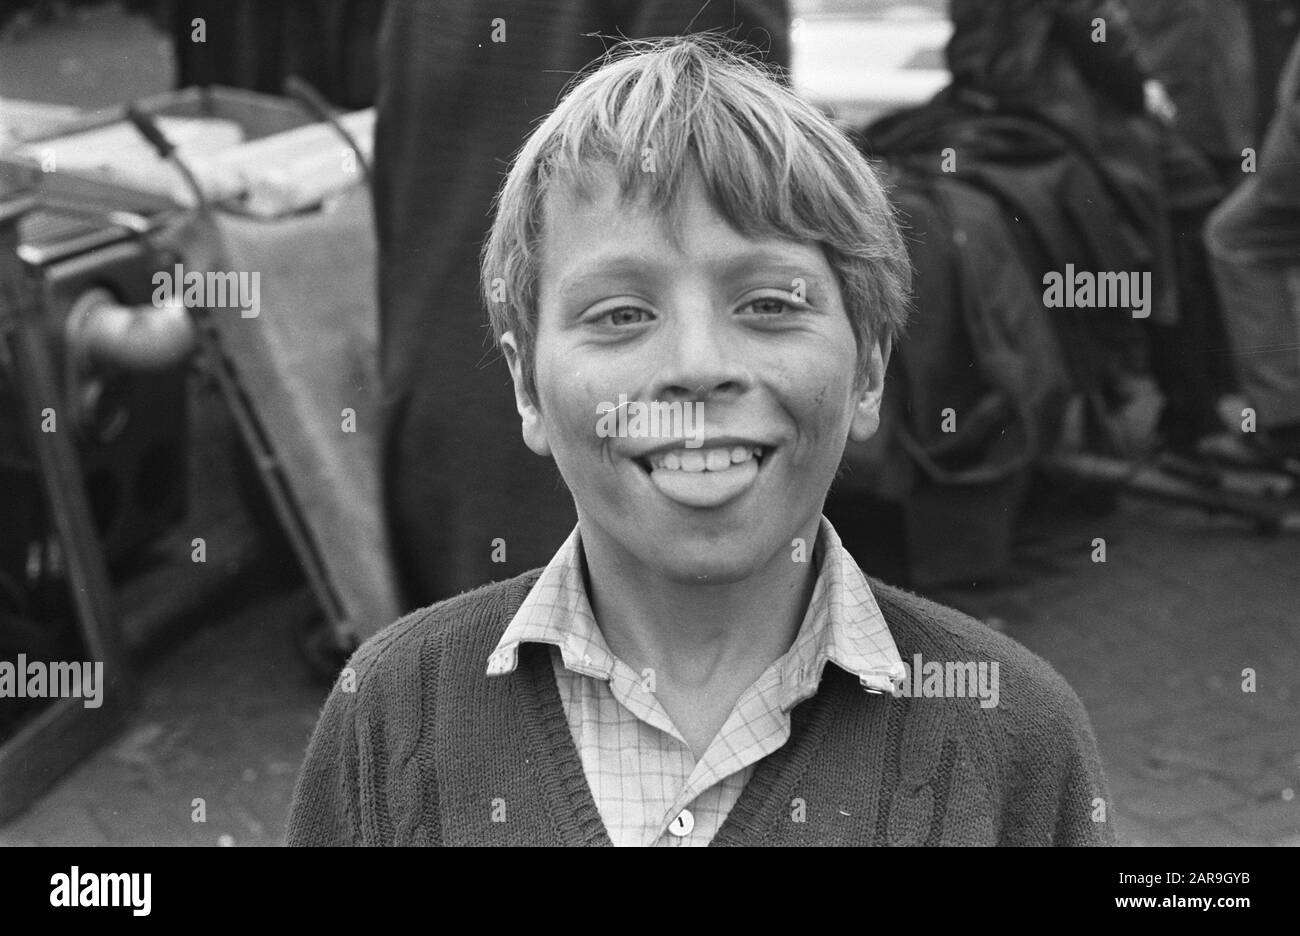 Amsterdam boys Black and White Stock Photos & Images - Page 2 - Alamy